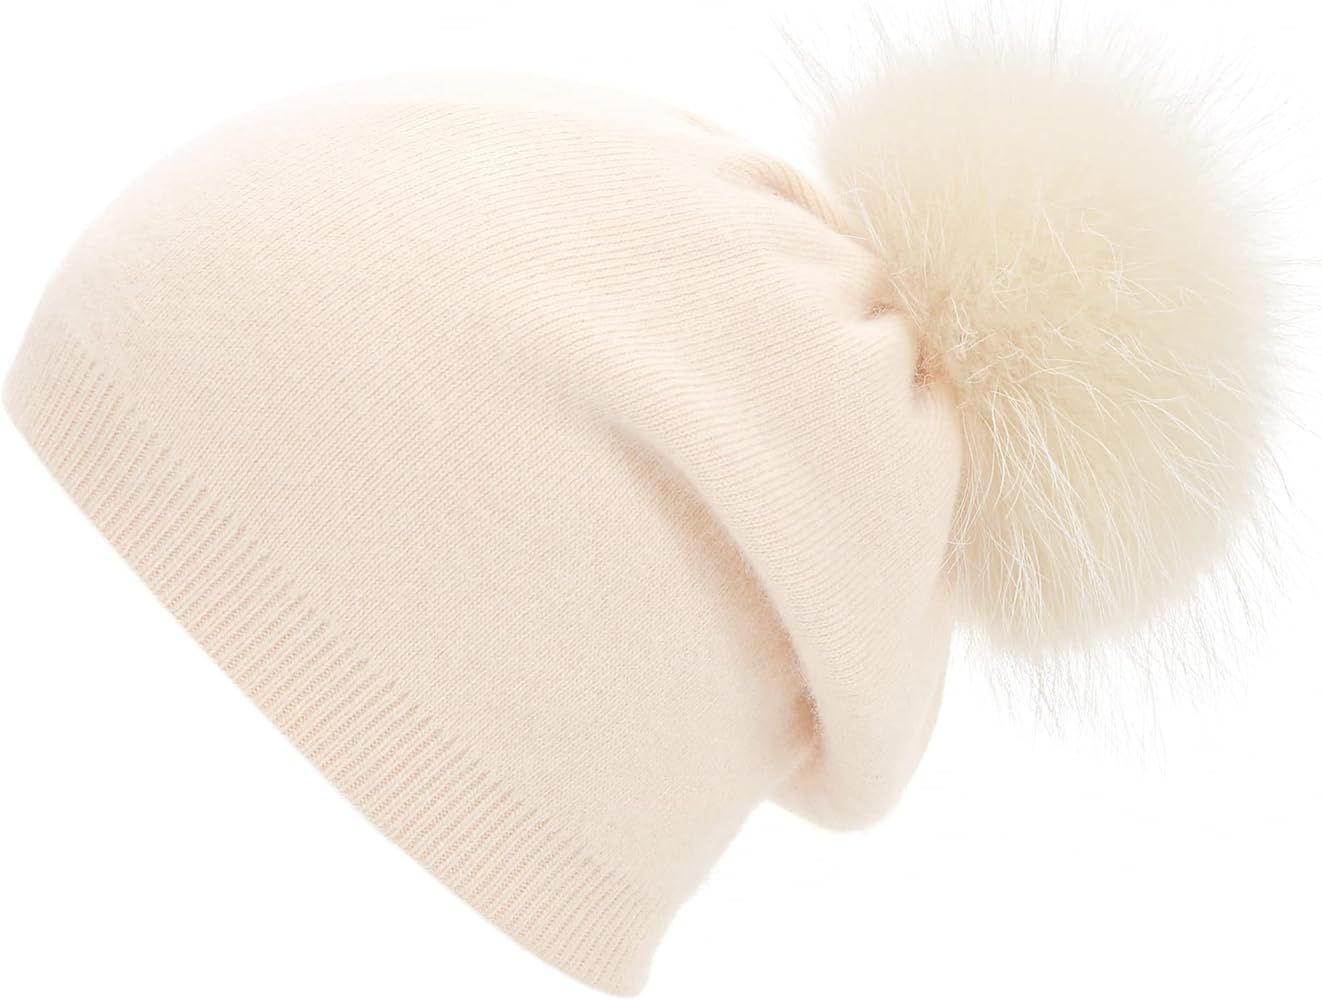 Double Layer Cashmere Slouchy Beanie - Real Fur Pom Pom Winter Knit Beanie Hat for Women Cashmere Sk | Amazon (US)